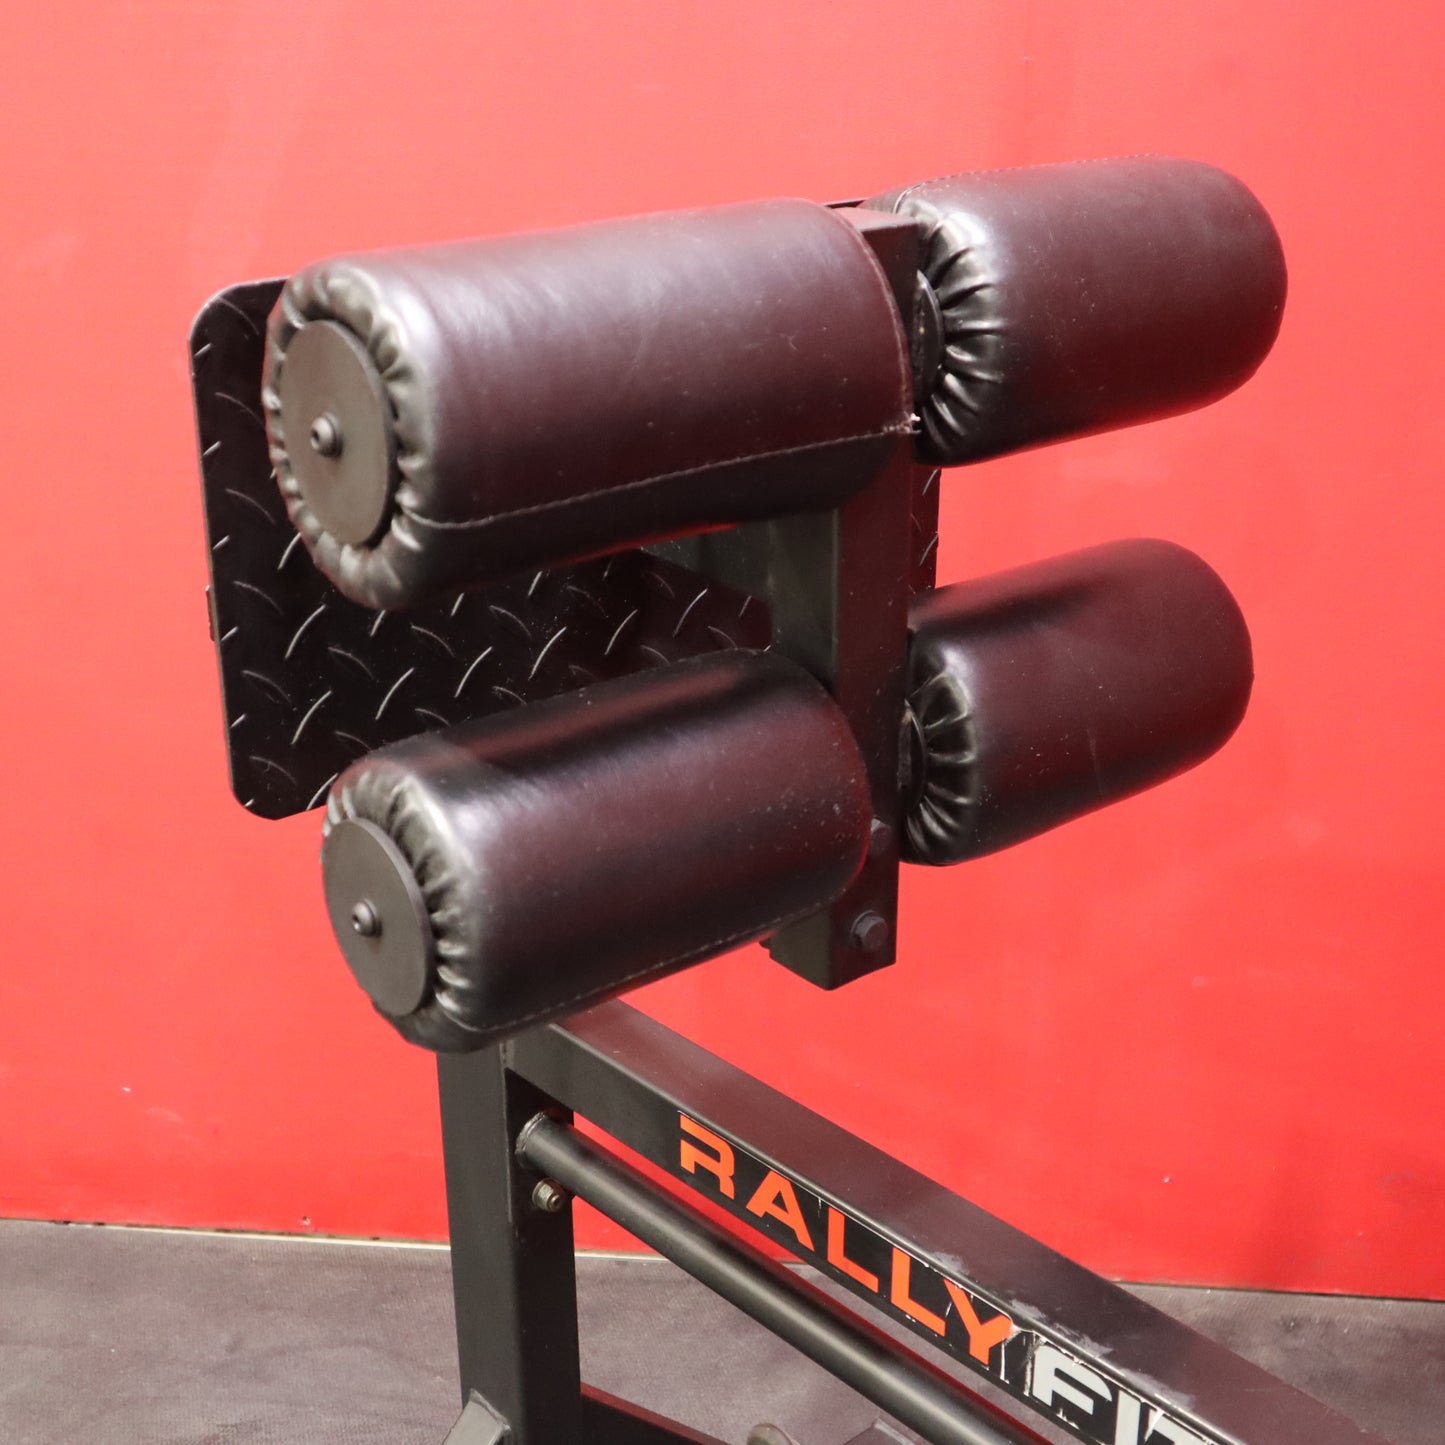 Rally Fitness GHD (Used)